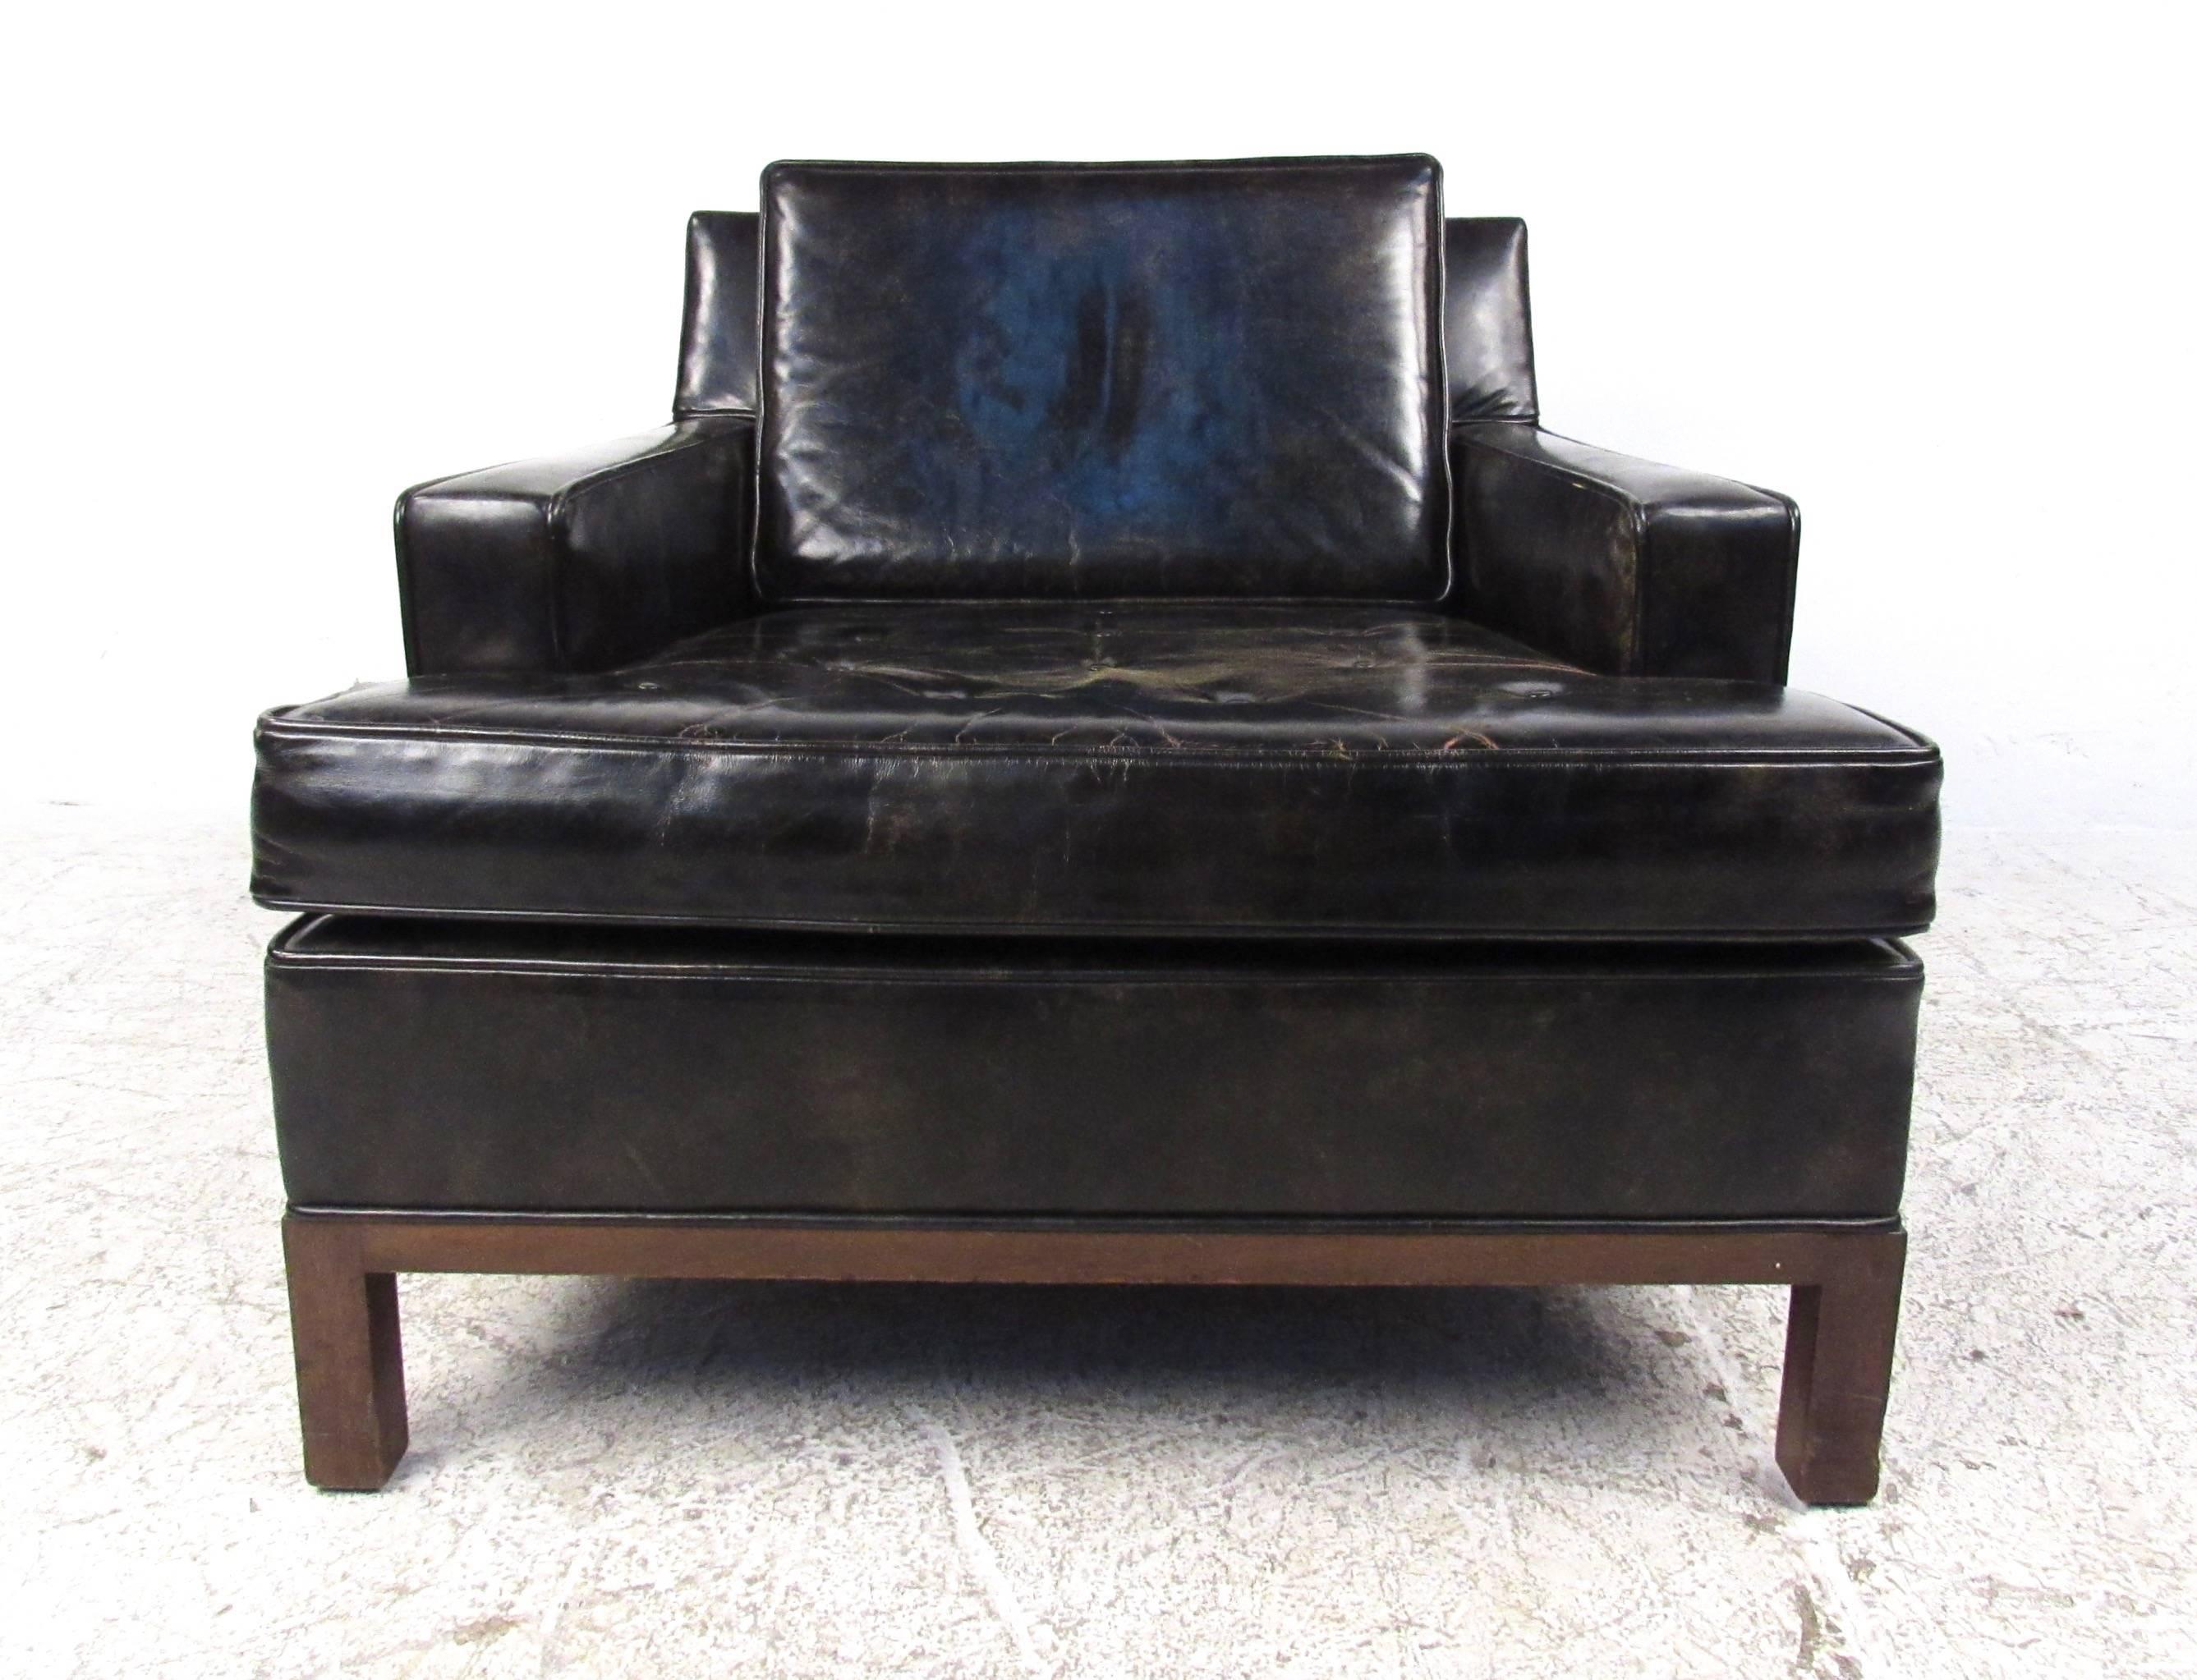 This comfortable vintage leather lounge chair by Harvey Probber features rich leather upholstery, a wonderful patinated look, and comfortable proportions. Walnut trim and legs add to the unique mid-century appeal of the piece, the original